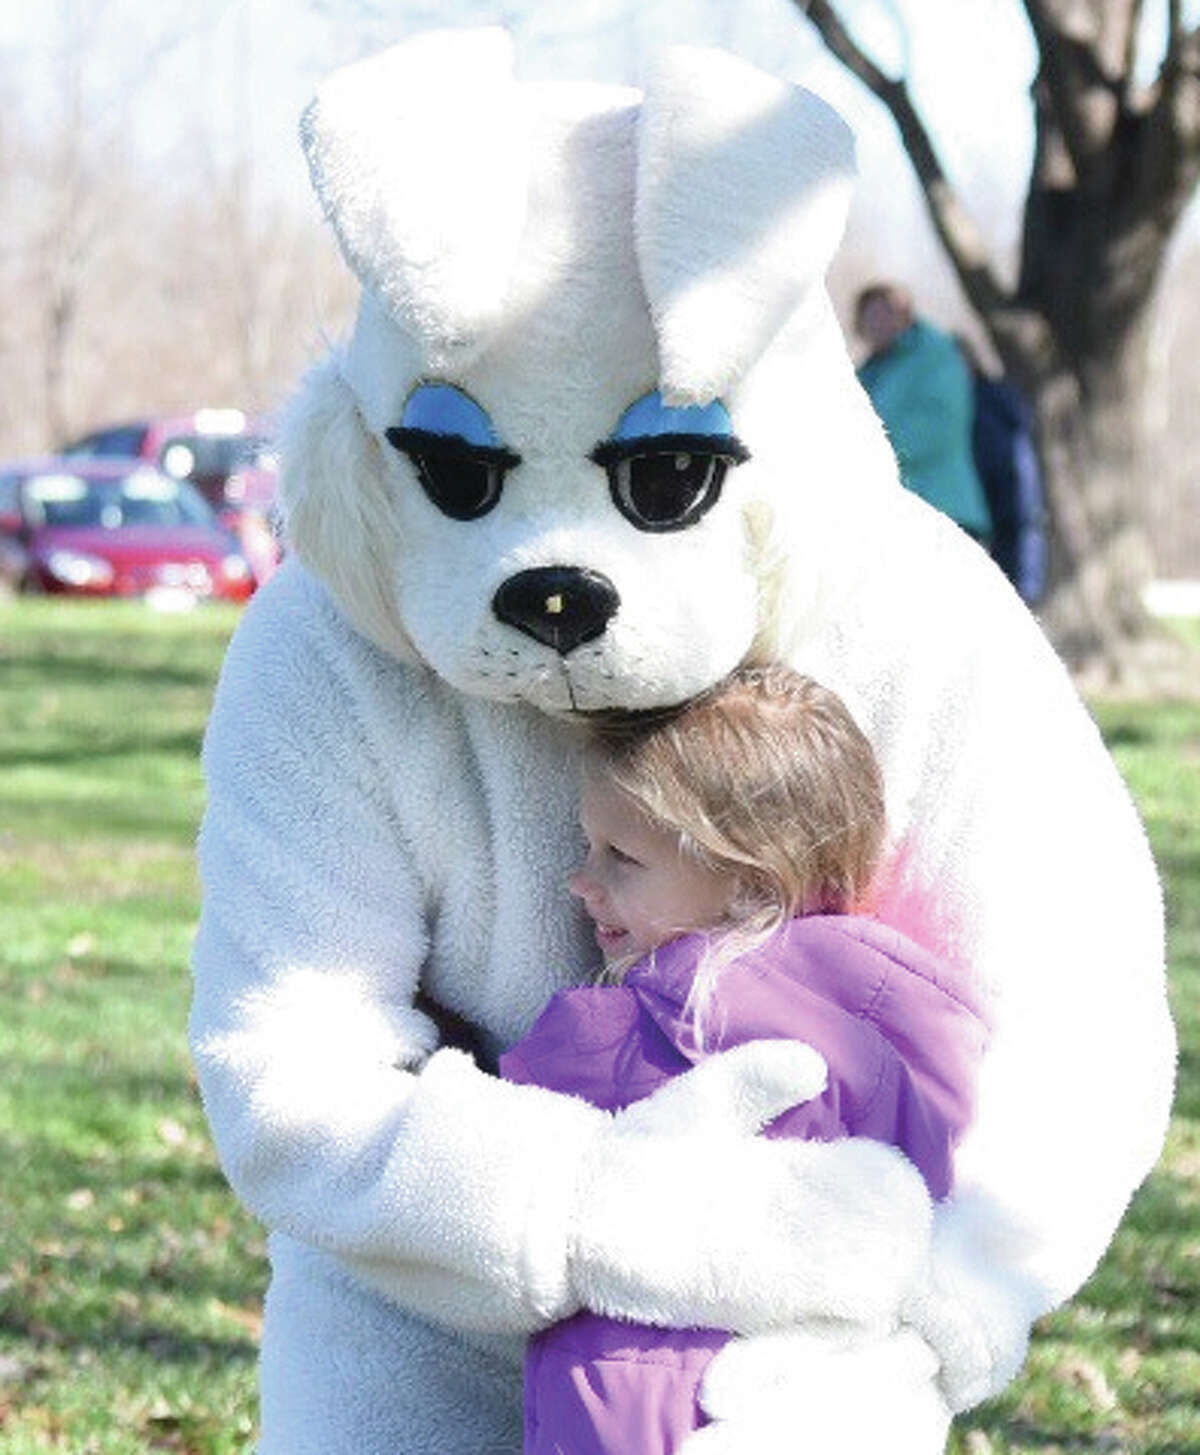 One Easter egg hunter on Saturday at Gordon F. Moore Park received a personal congratulations from the Easter bunny.